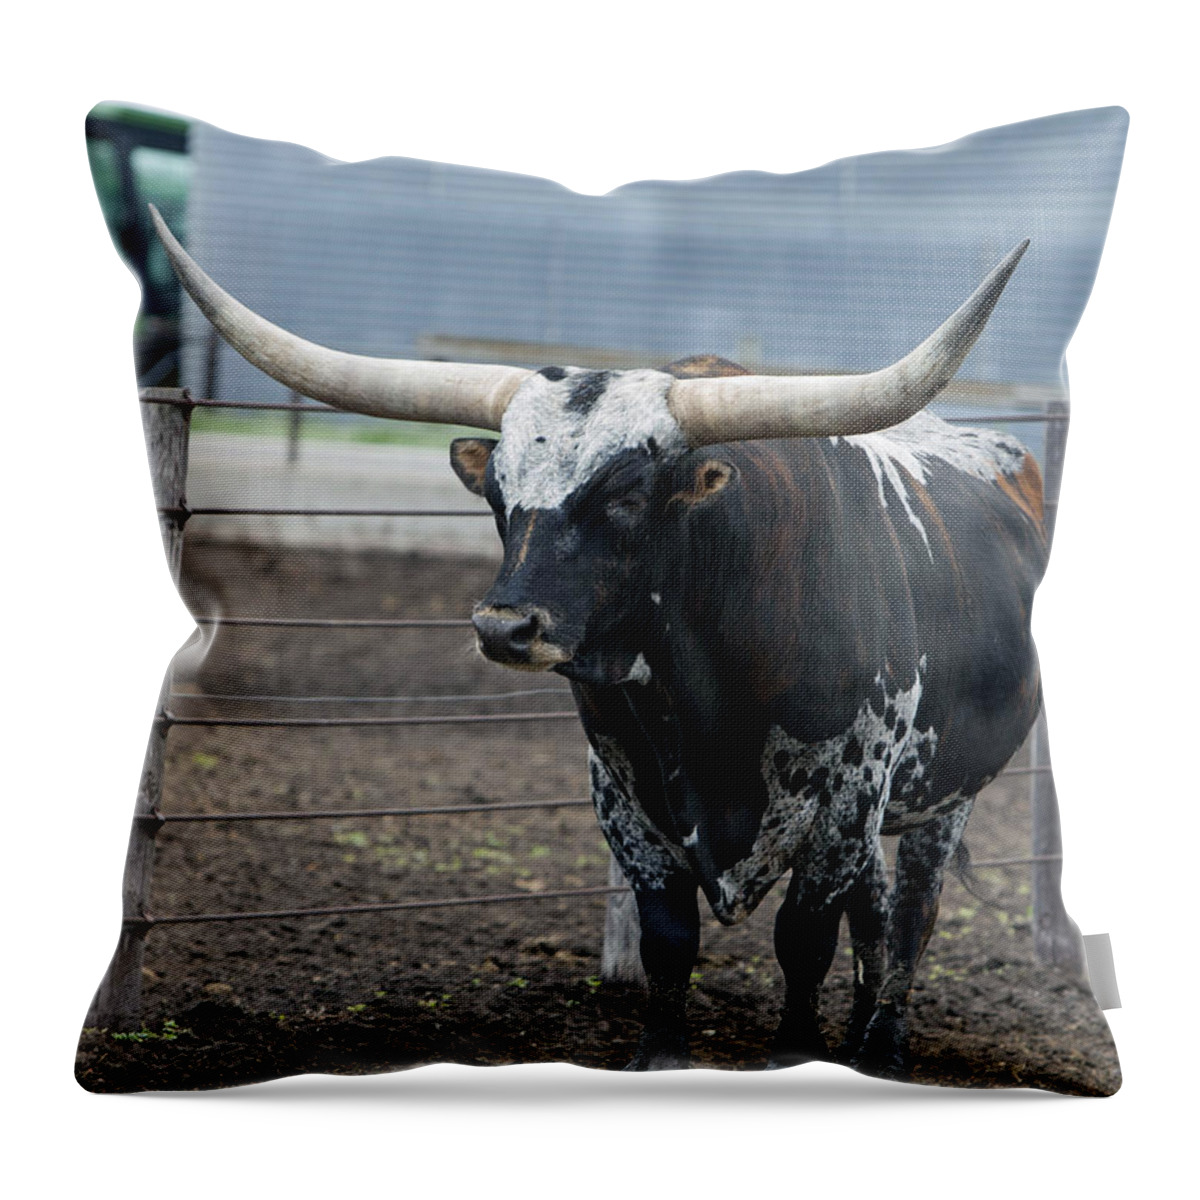 Texas Throw Pillow featuring the photograph Texas Longhorn Corralled #1 by Stephen Schwiesow